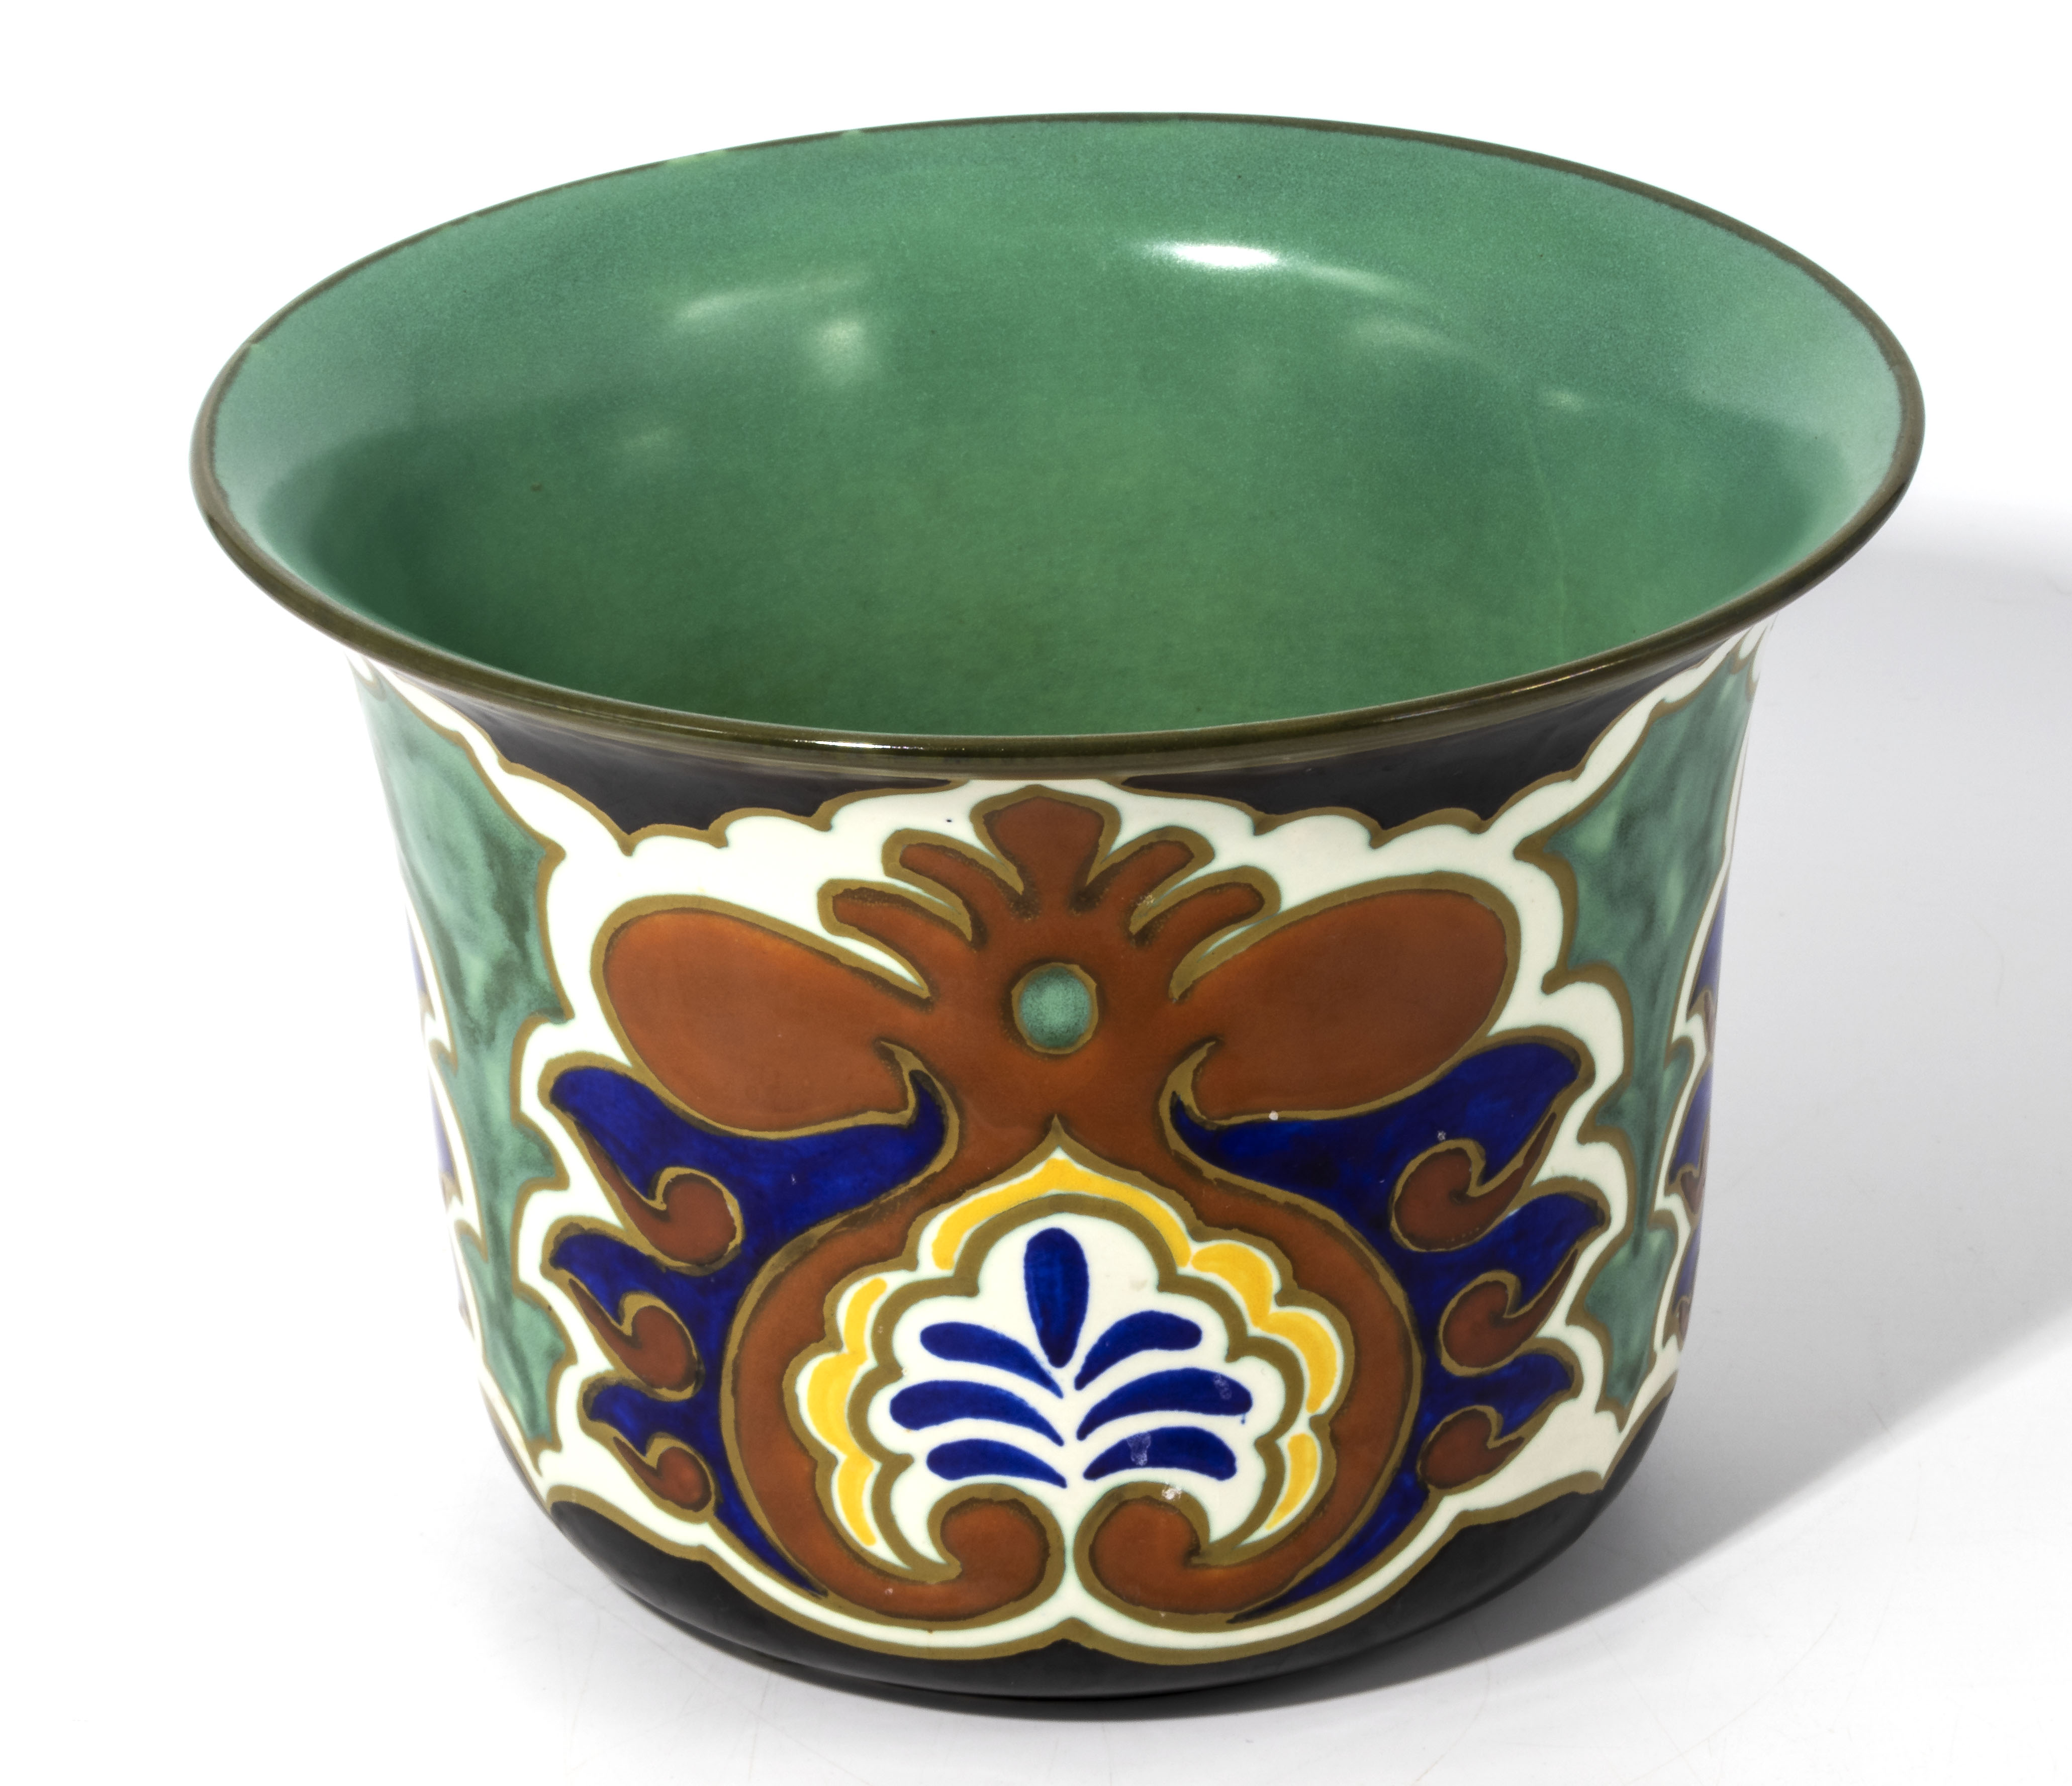 Gouda art pottery decorated vase circa 1920/30s, with a turquoise glazed interior, with floral - Image 4 of 13